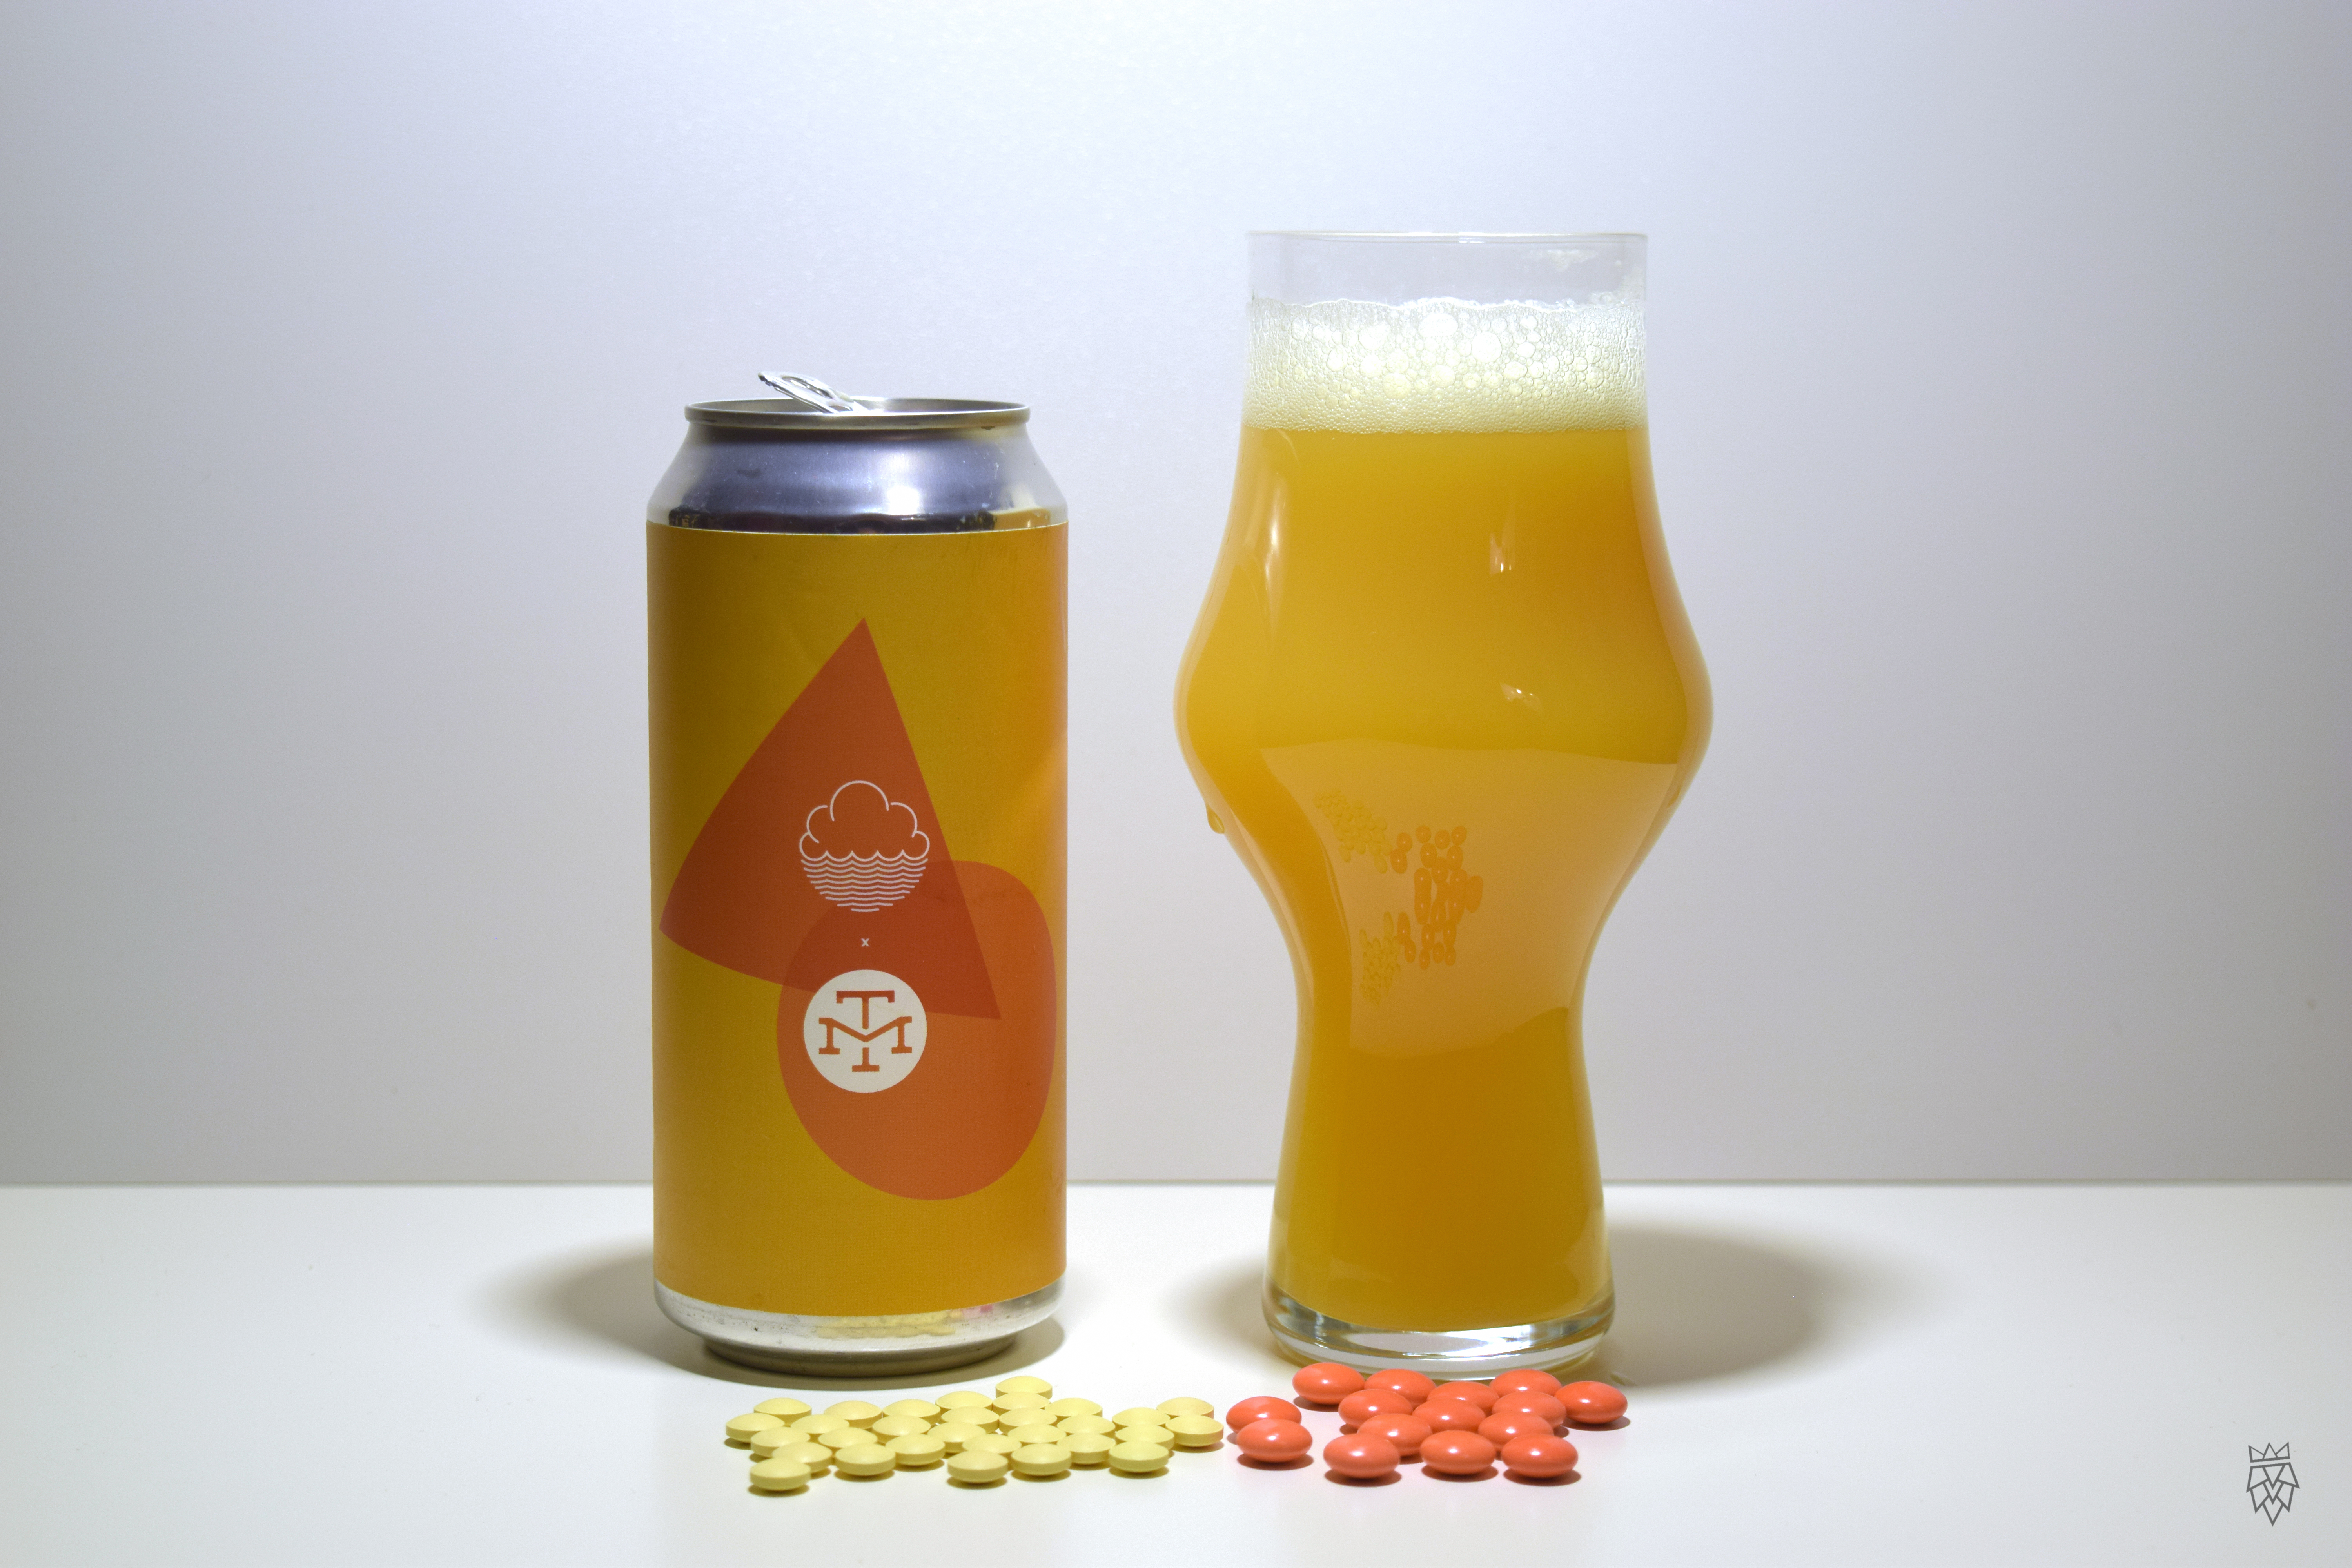 Cloudwater Lipids and Proteins